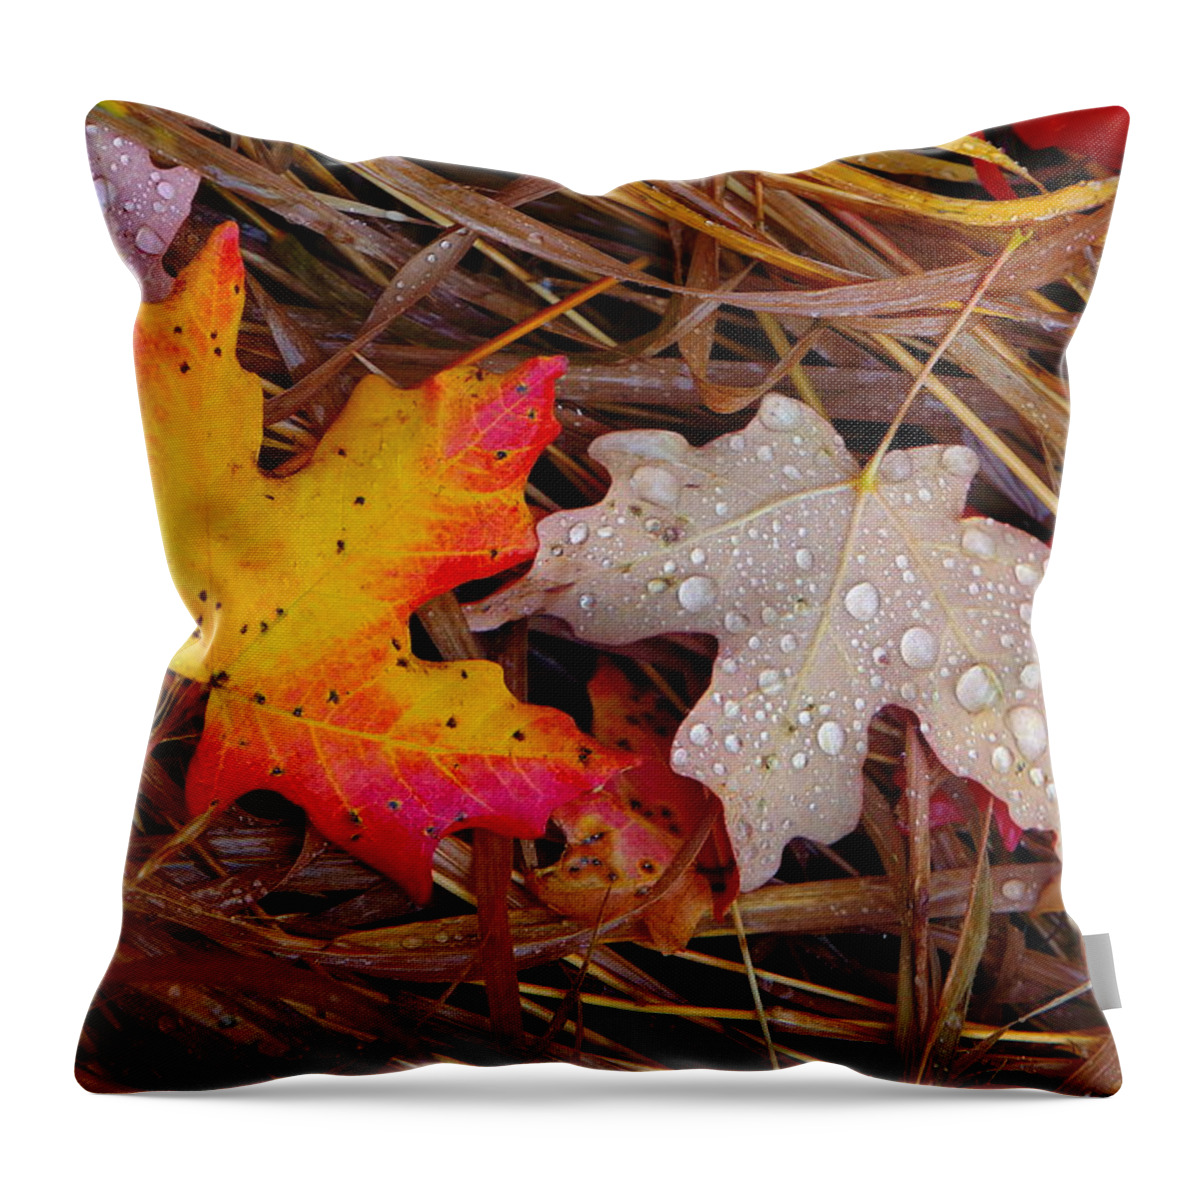 Autumn Leafs Throw Pillow featuring the photograph Yin Yang by David Andersen